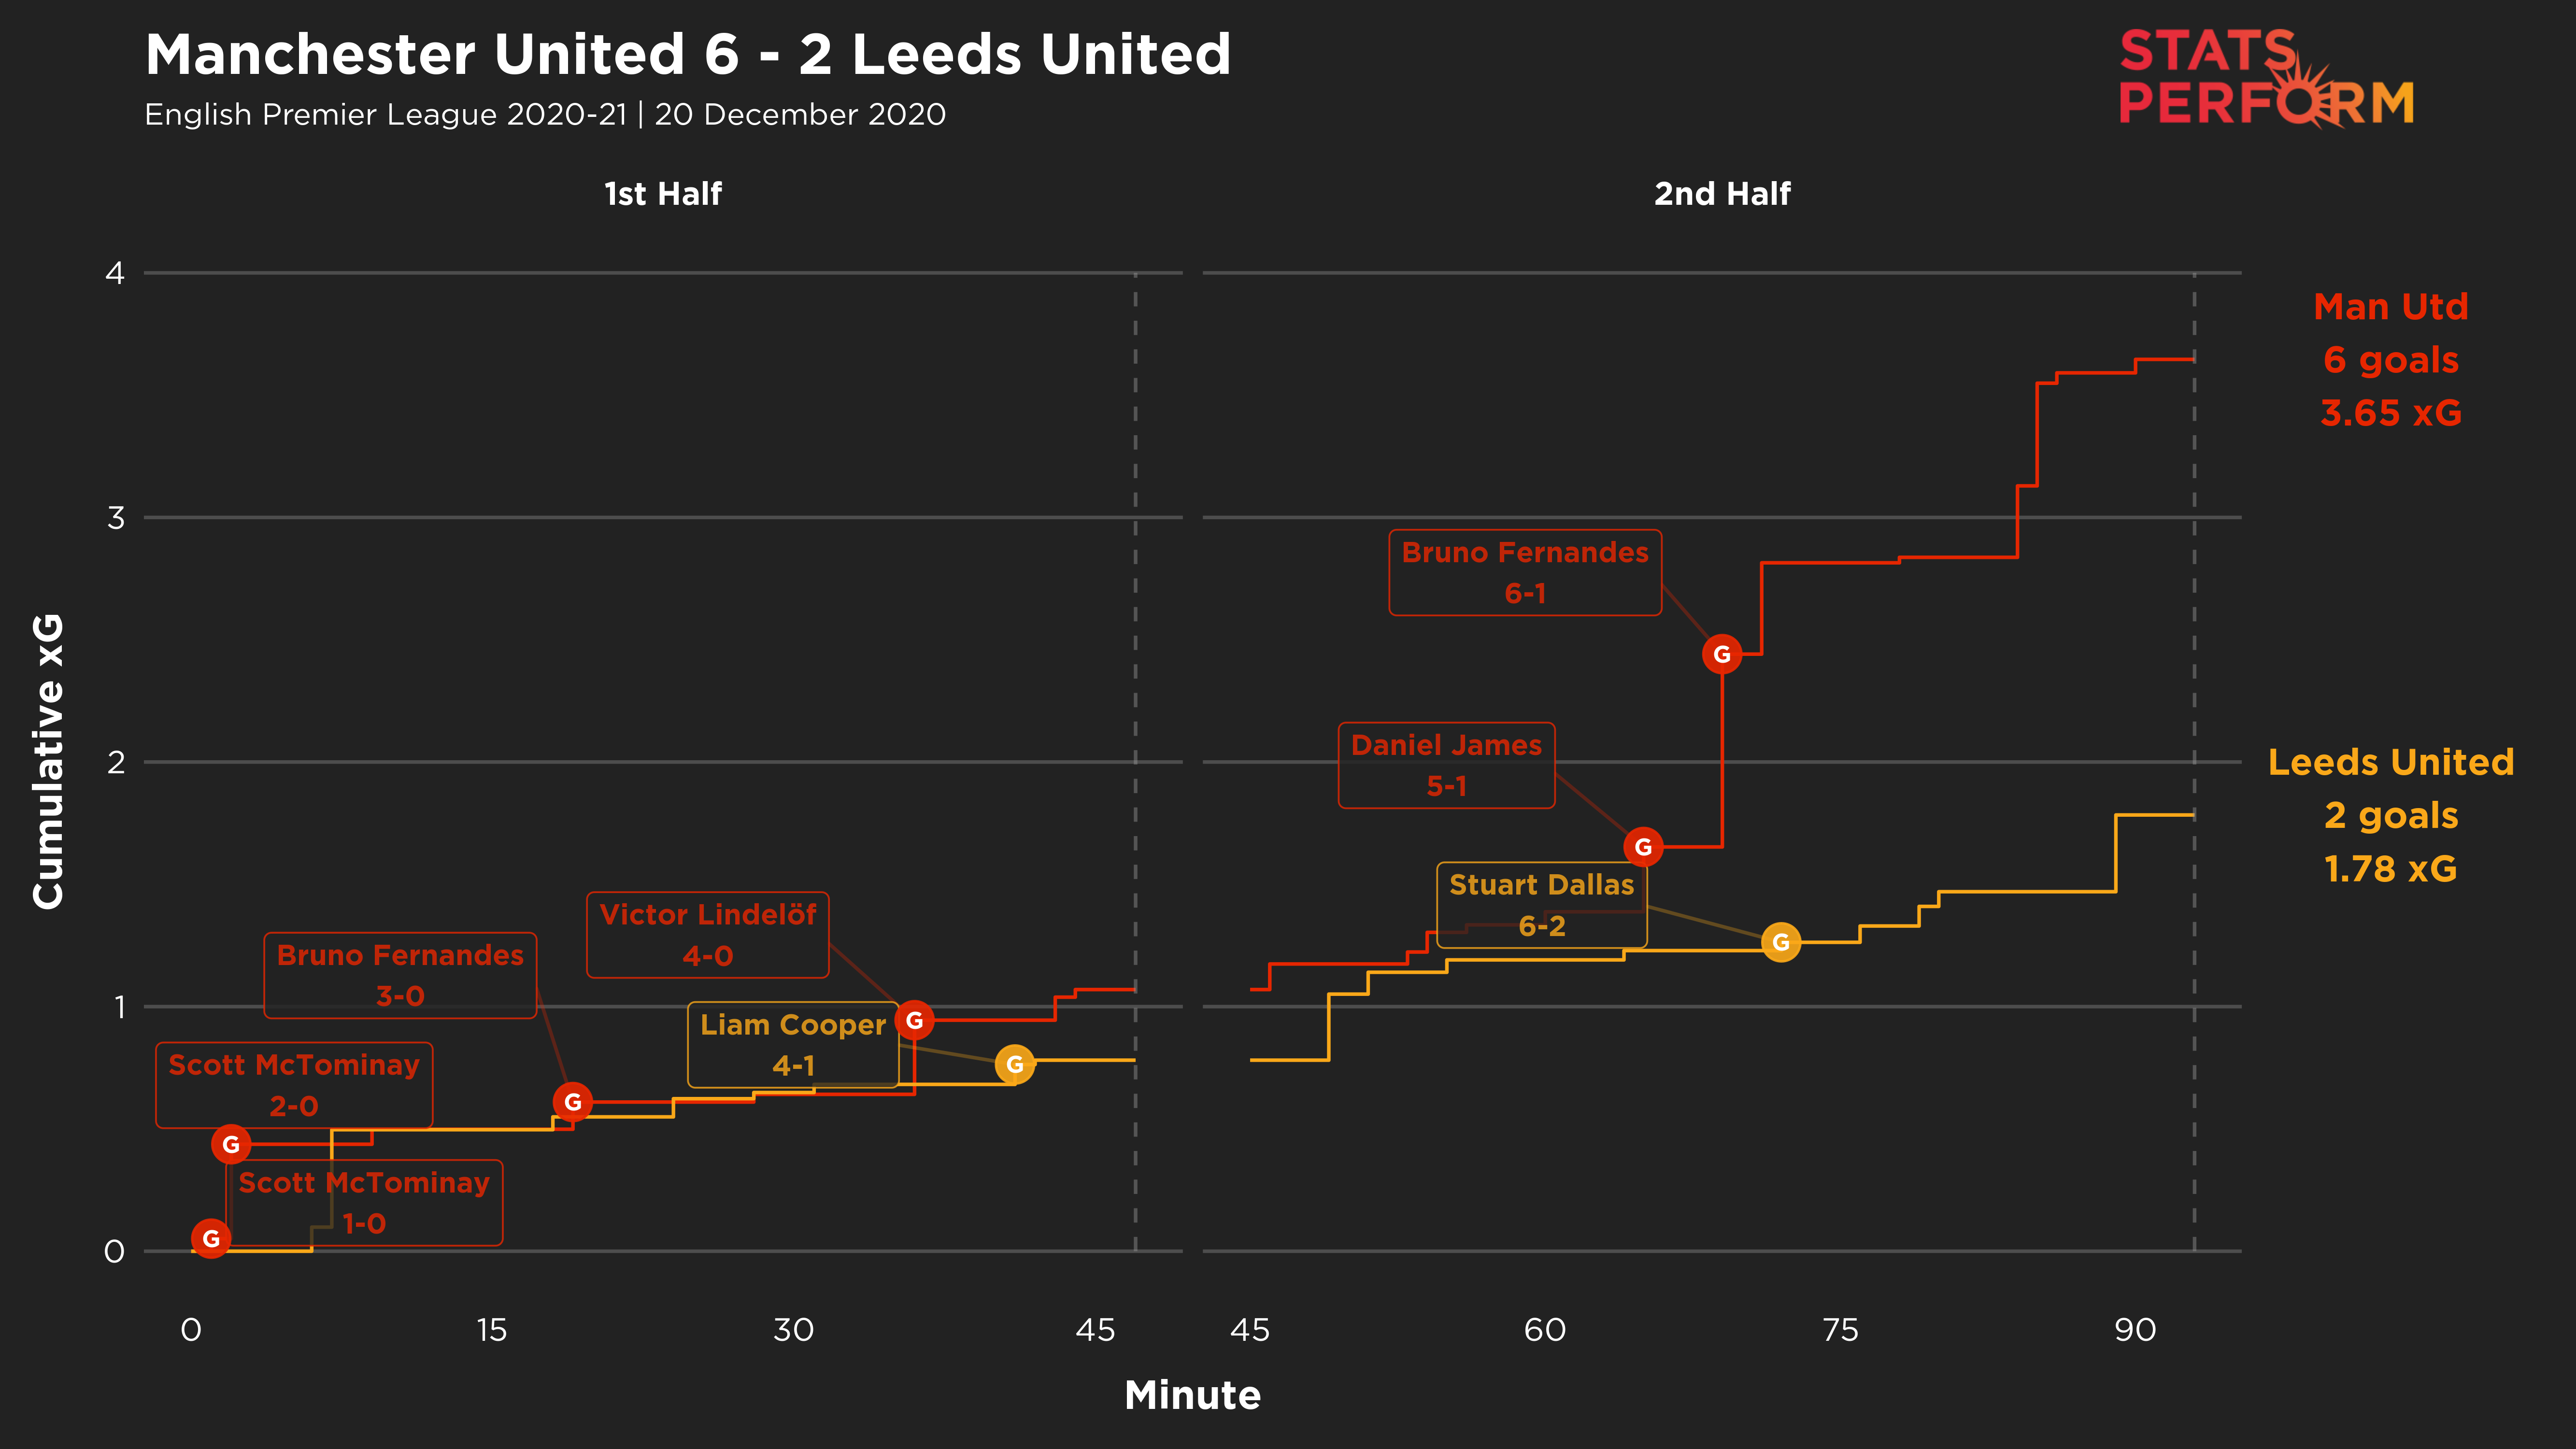 Man Utd and Leeds were neck-and-neck in terms of xG for much of the match